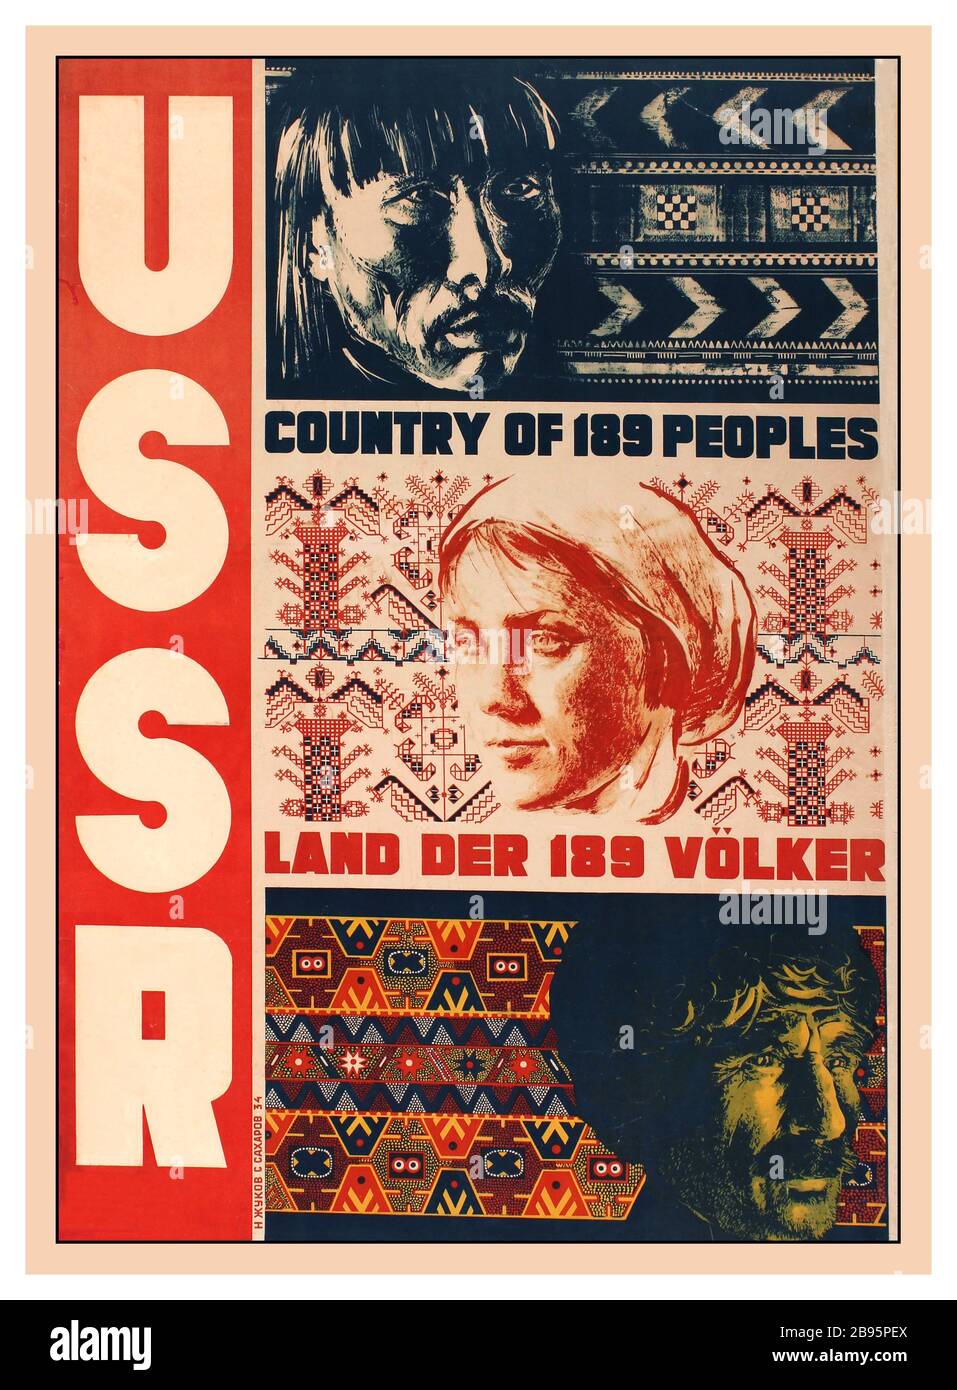 Vintage travel propaganda poster published by Intourist: USSR, Land of 189 Peoples -  USSR Poster 'Land der 189 Volker'. 'country of 189 peoples' design and artwork by Szhukov and Sakharov showing vertical USSR on left and three portraits on the right side. Printed in Soviet Union, Moscow. c1930  Western advertising styles were used to appeal to target audiences.  Russia 1934, designer: N. Szhukov and S. Sakharov, Stock Photo